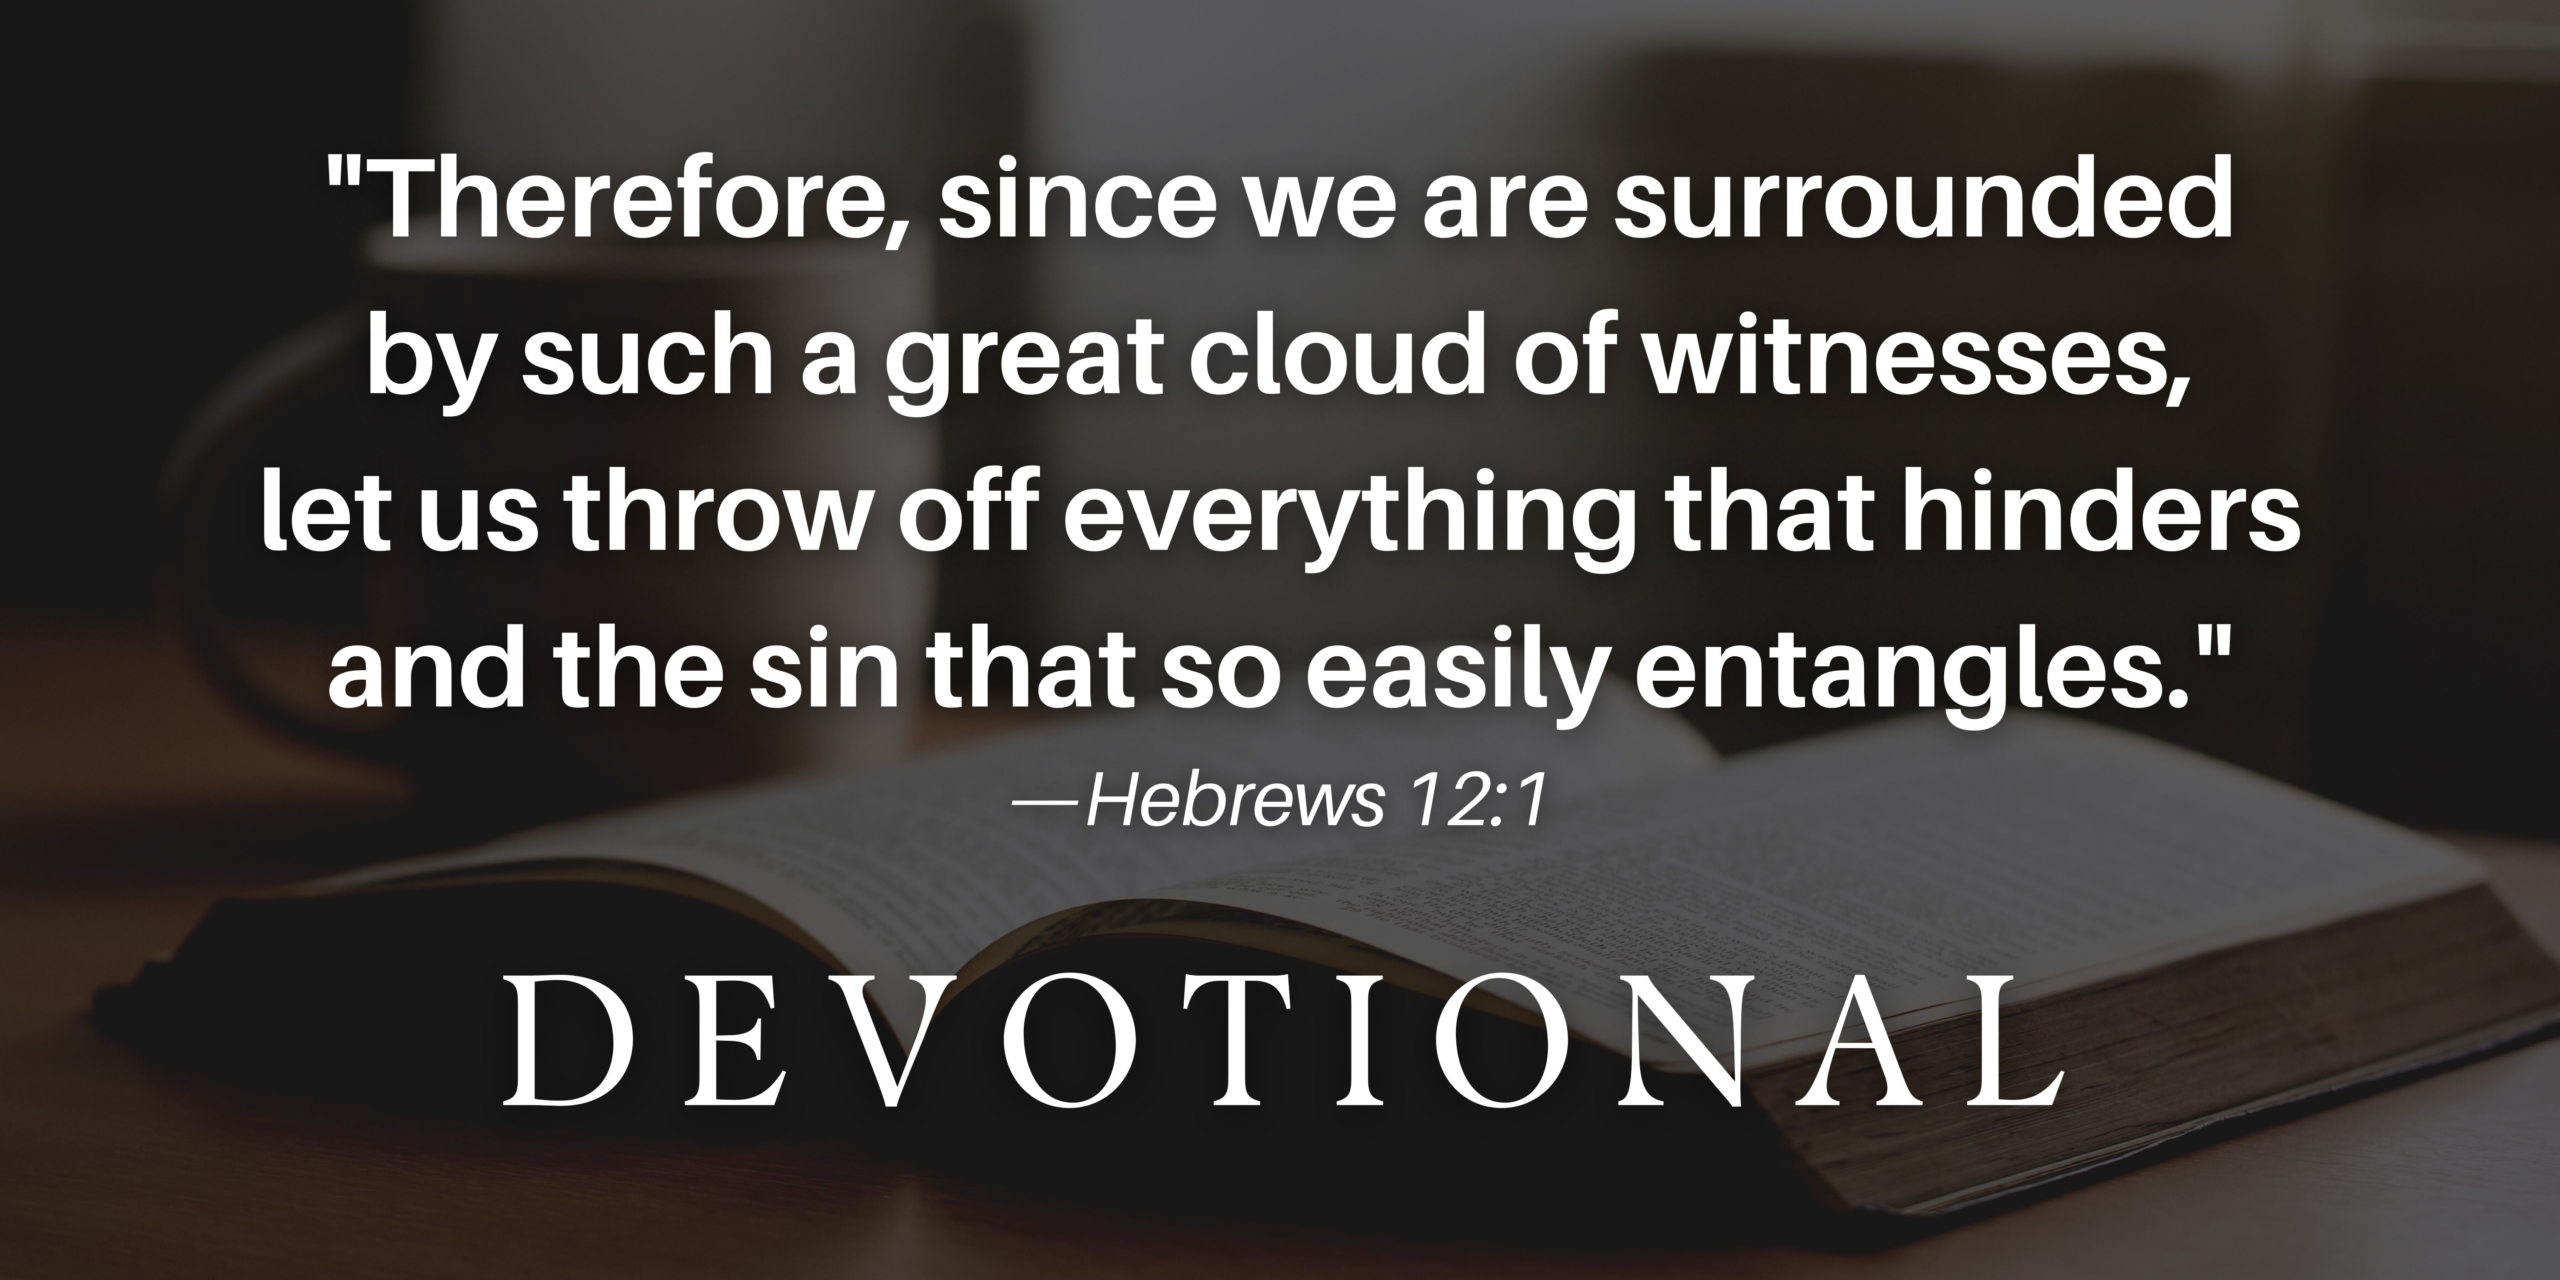 "Therefore, since we are surrounded by such a great cloud of witnesses, let us throw off everything that hinders and the sin that so easily entangles." Hebrews 12:1 DEVOTIONAL